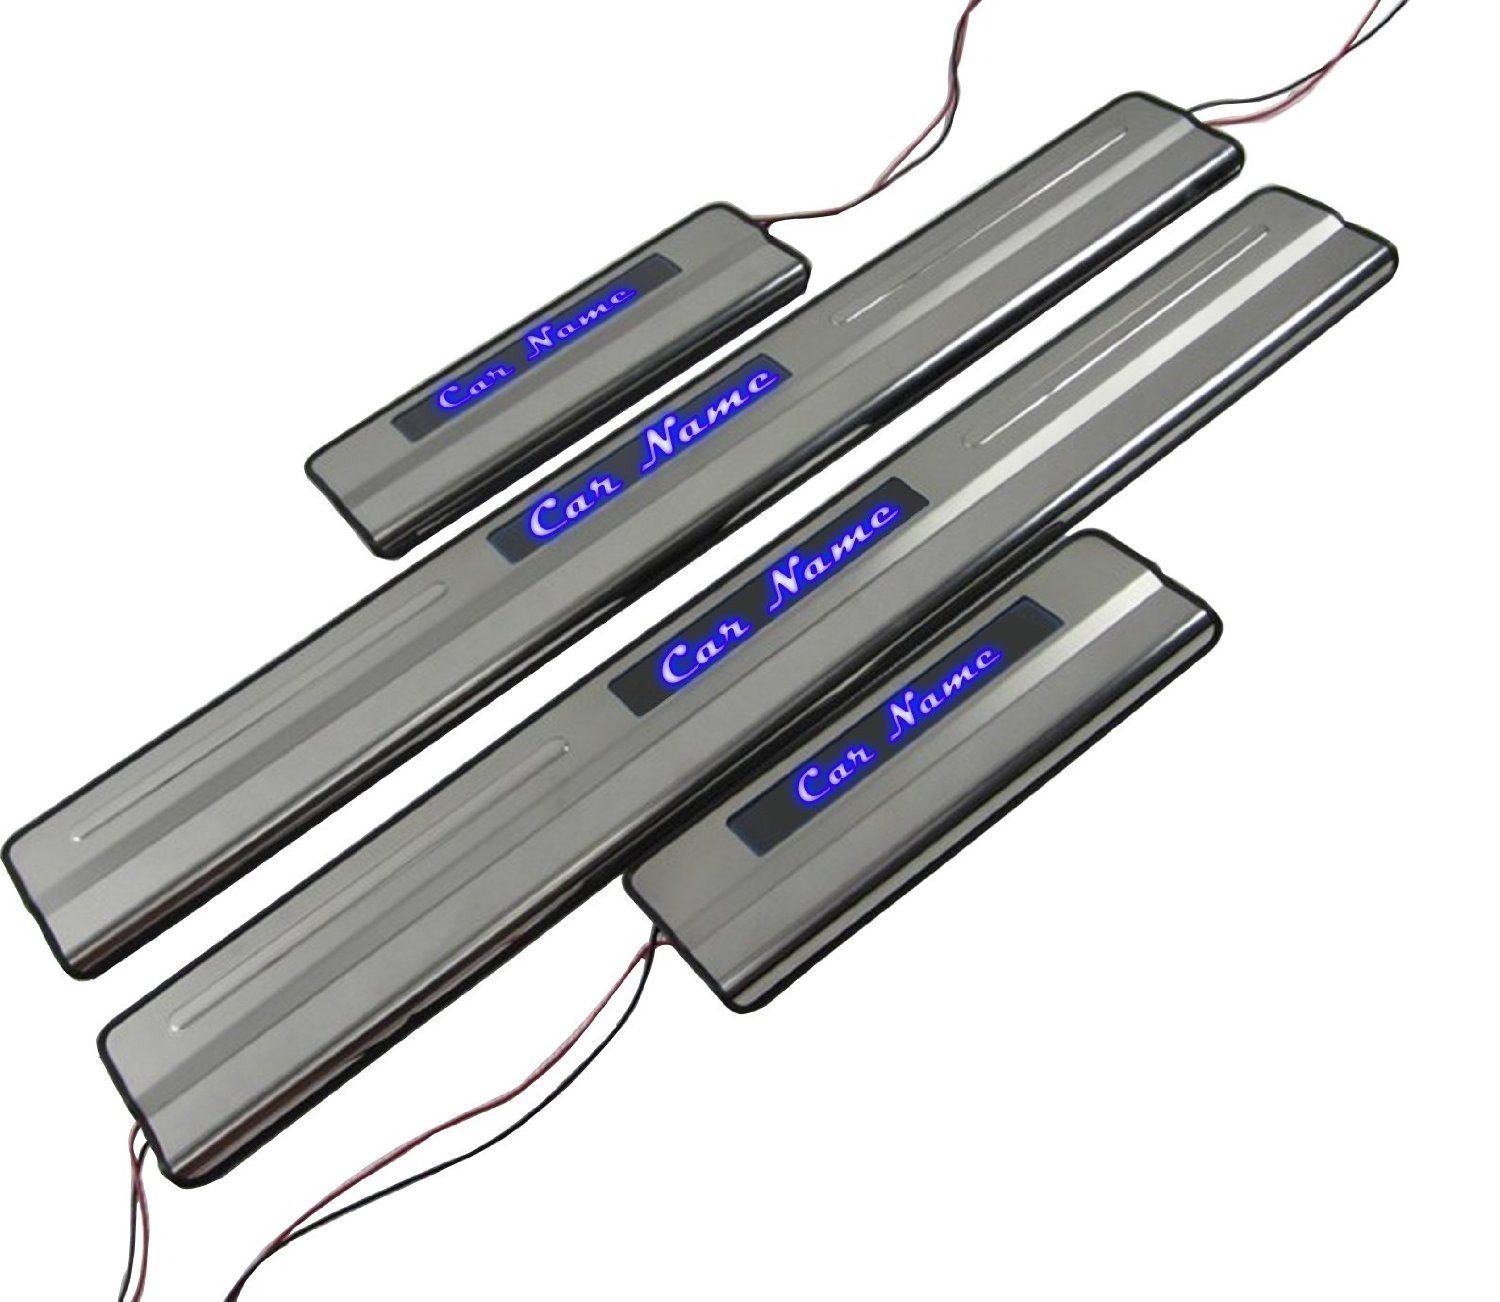 LED Doorstep Garnish Stainless Steel Scuff/FootStep Sill Plate For FORD FIGO(Set of 4pcs)